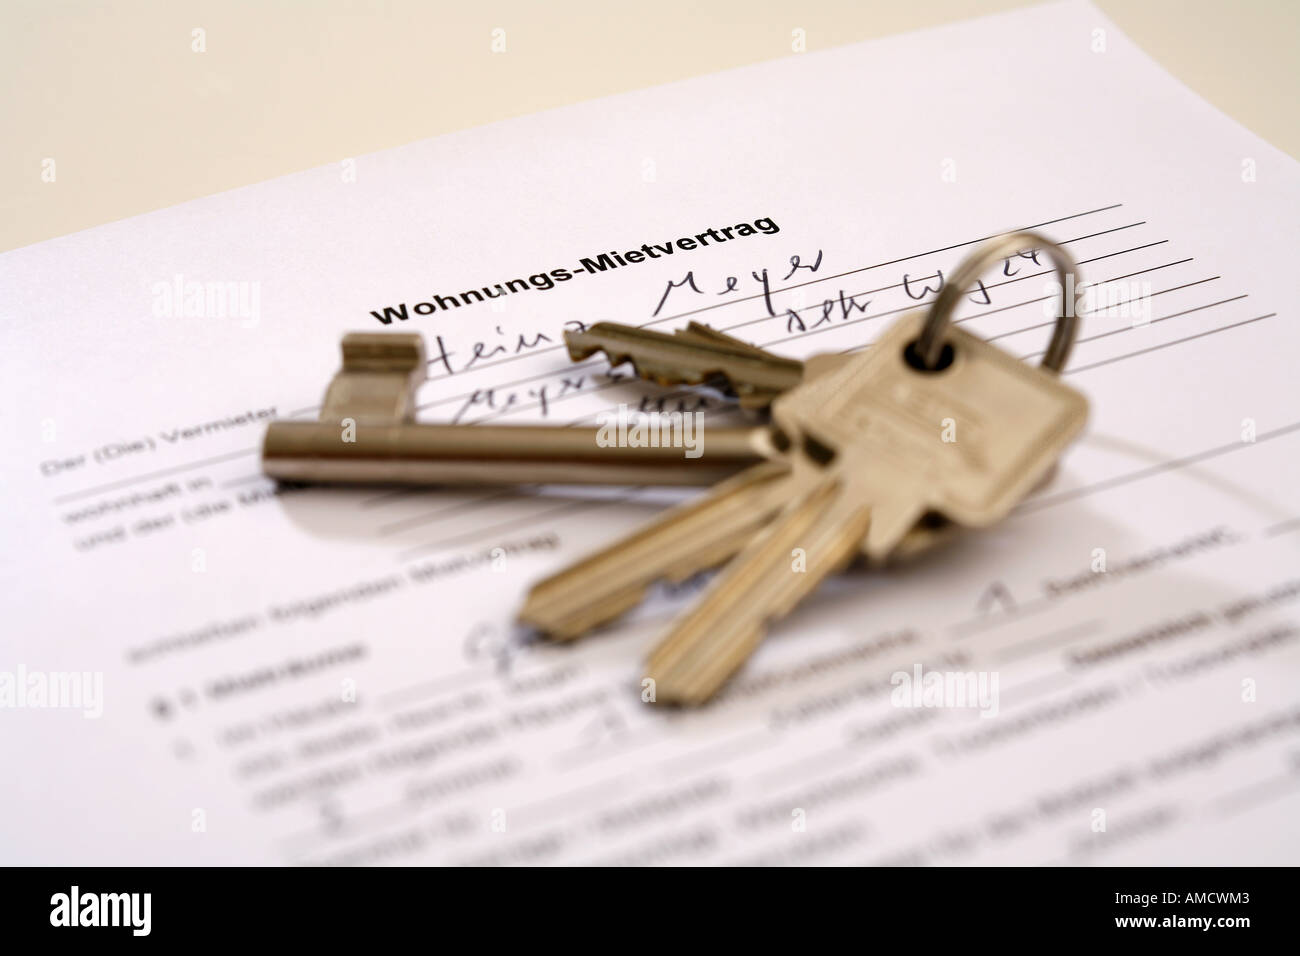 A bunch of keys lying on the document Stock Photo